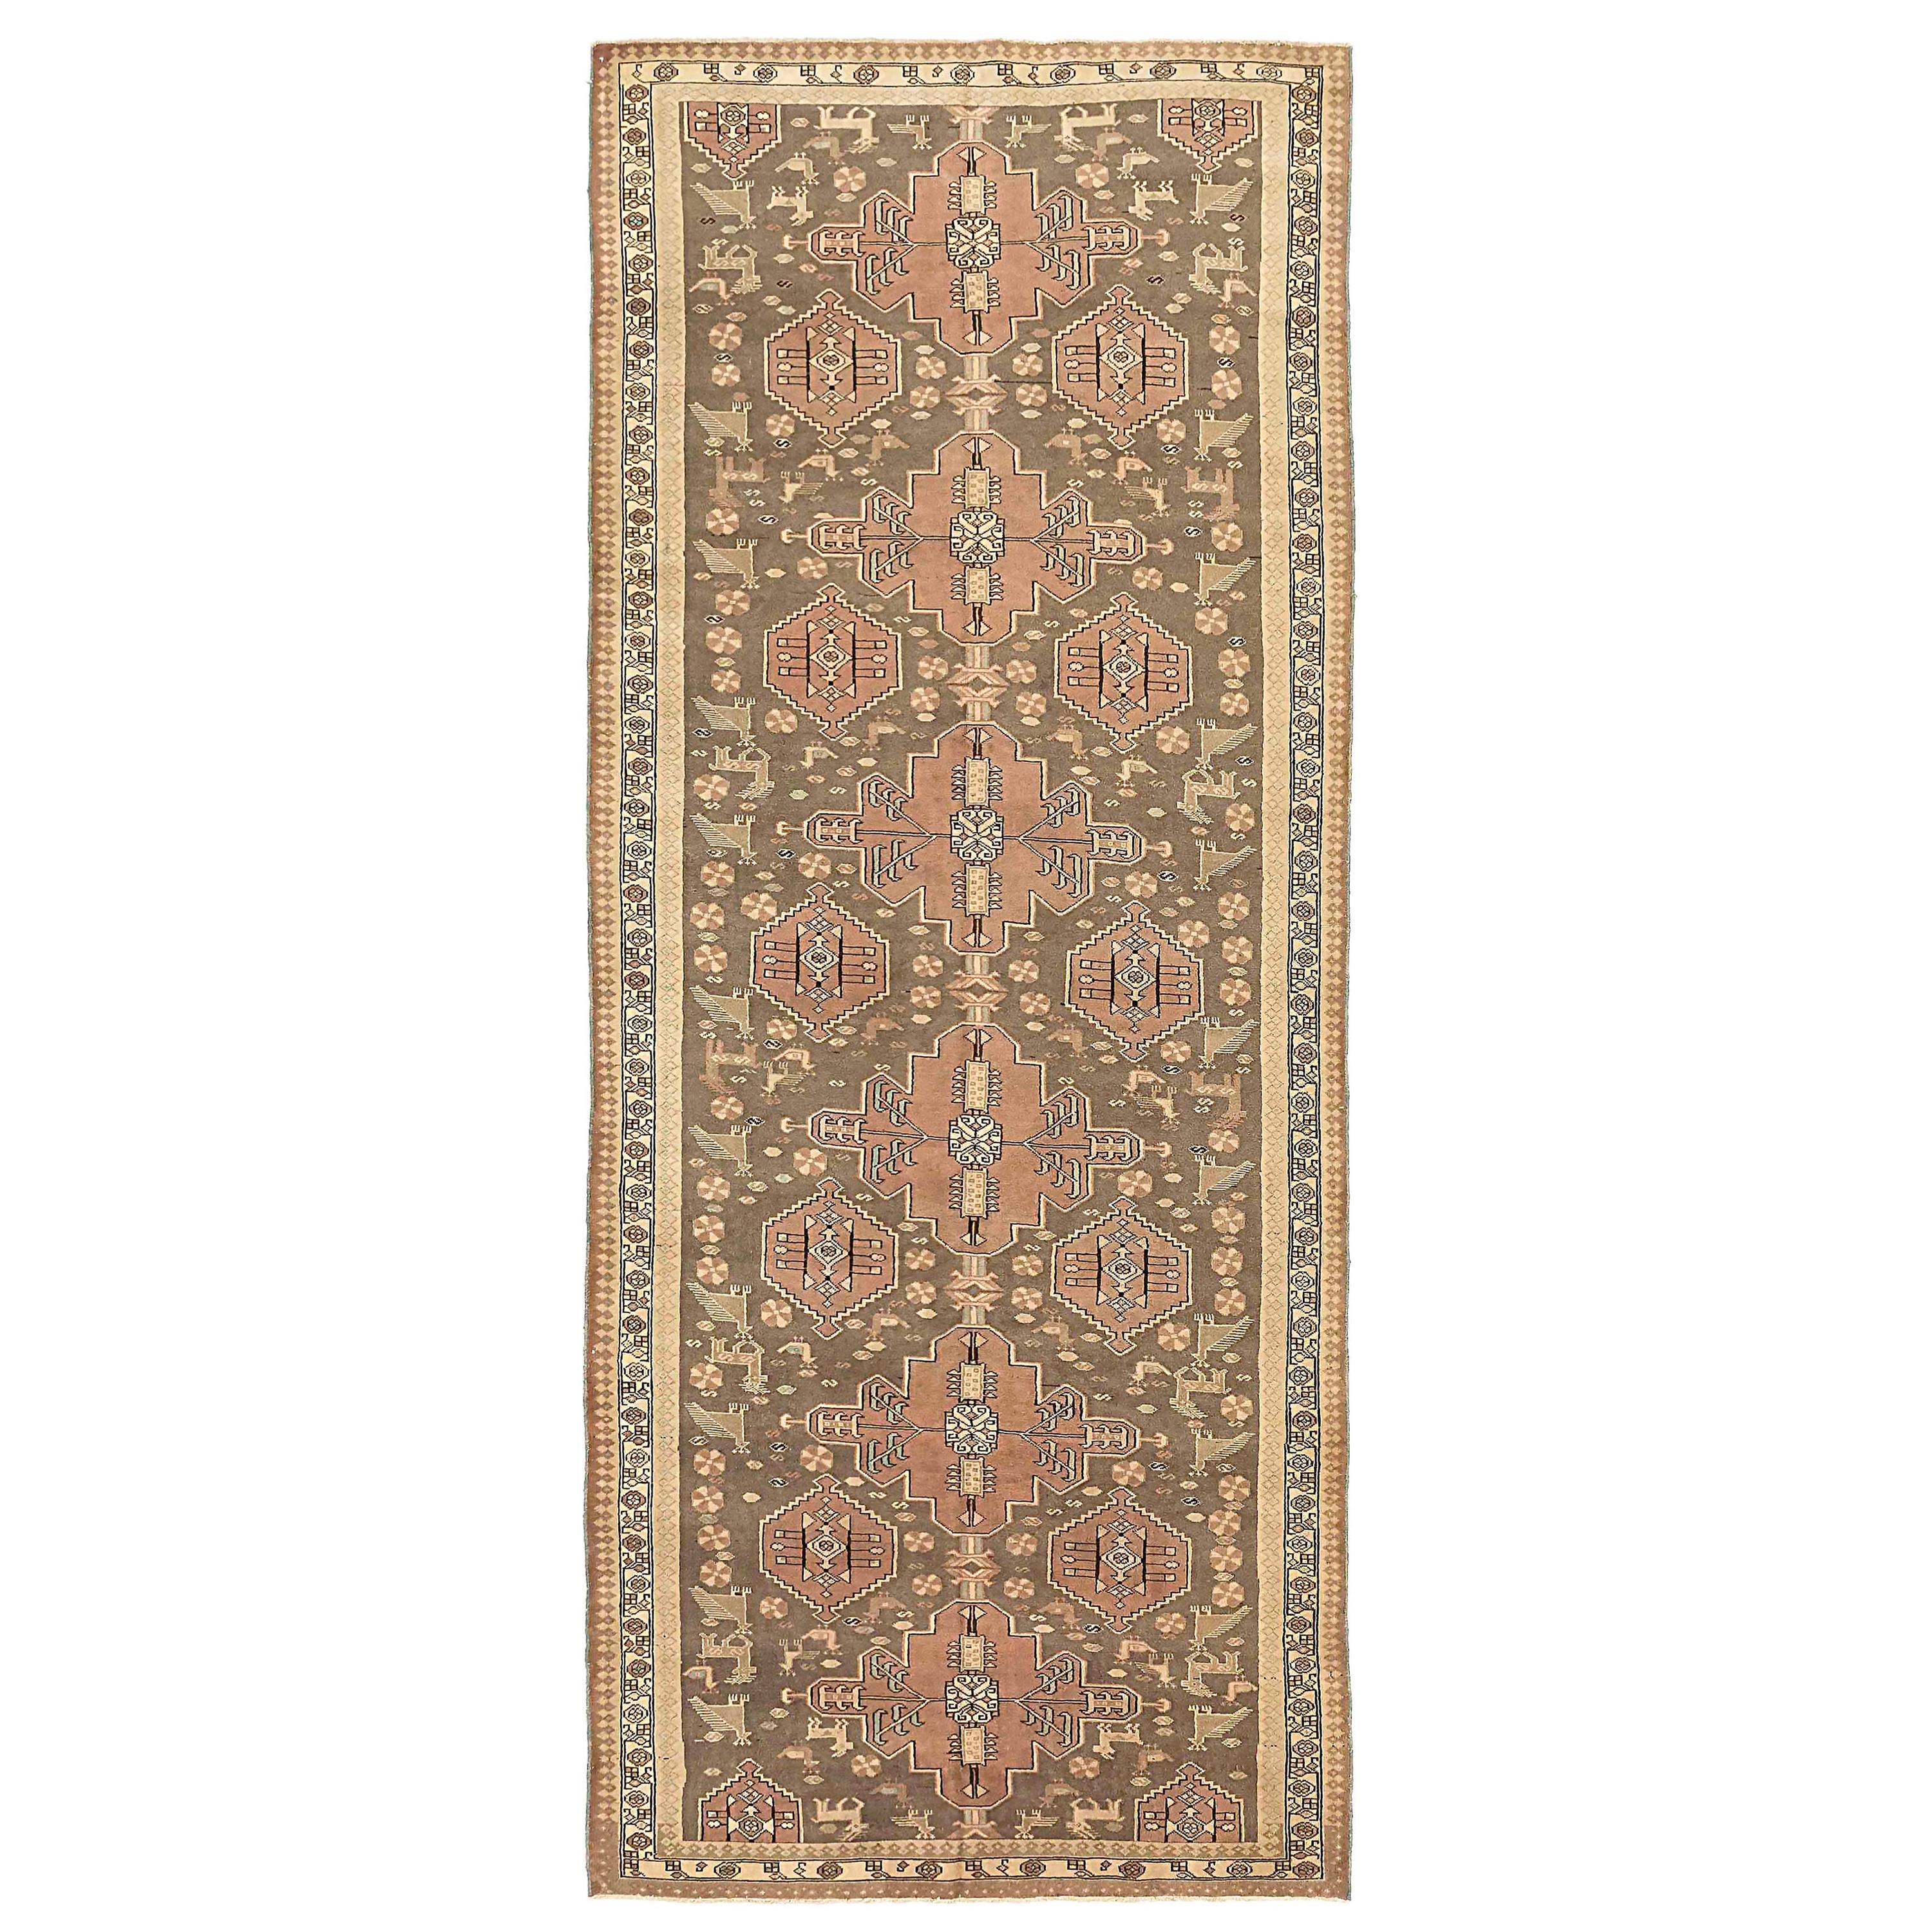 Antique Persian Malayer Rug with Brown & Black Tribal Medallions on Beige Field